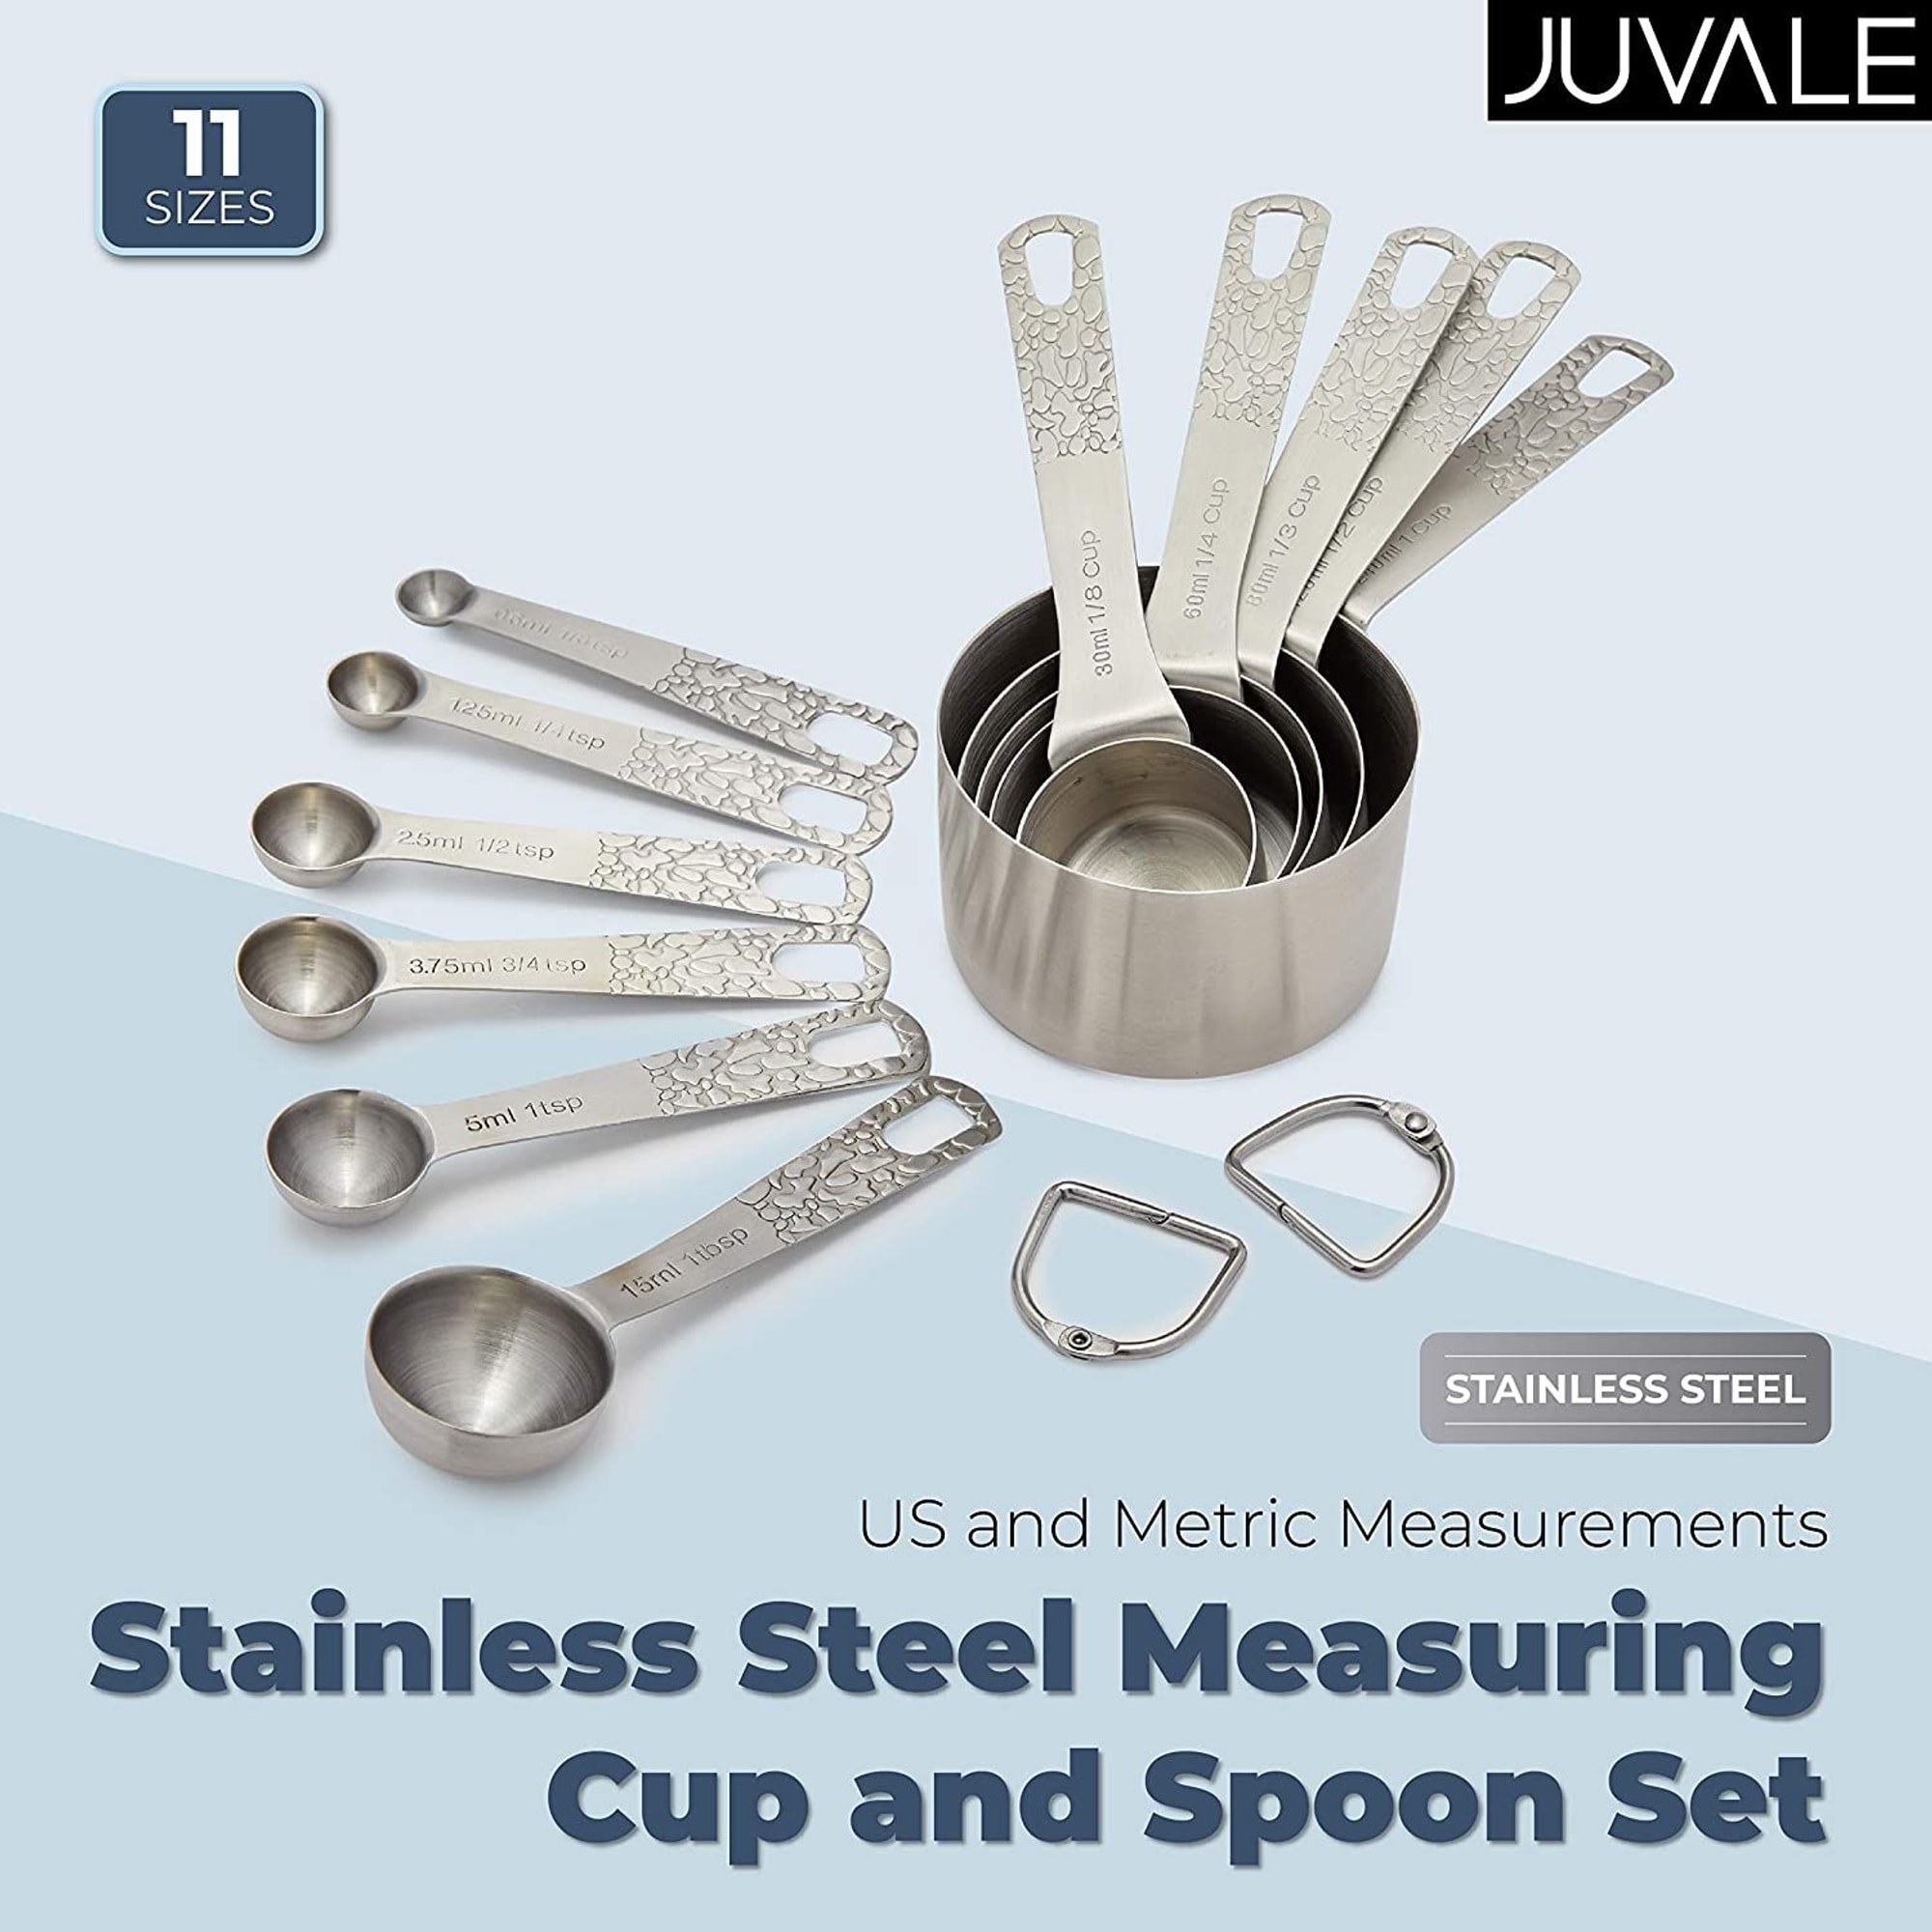 https://ak1.ostkcdn.com/images/products/is/images/direct/4c6dd9b5505356c185ad95ec565ea491ae04bccb/Stainless-Steel-Measuring-Cup-and-Spoon-Set%2C-US-and-Metric-Measurements-%2811-Sizes%29.jpg